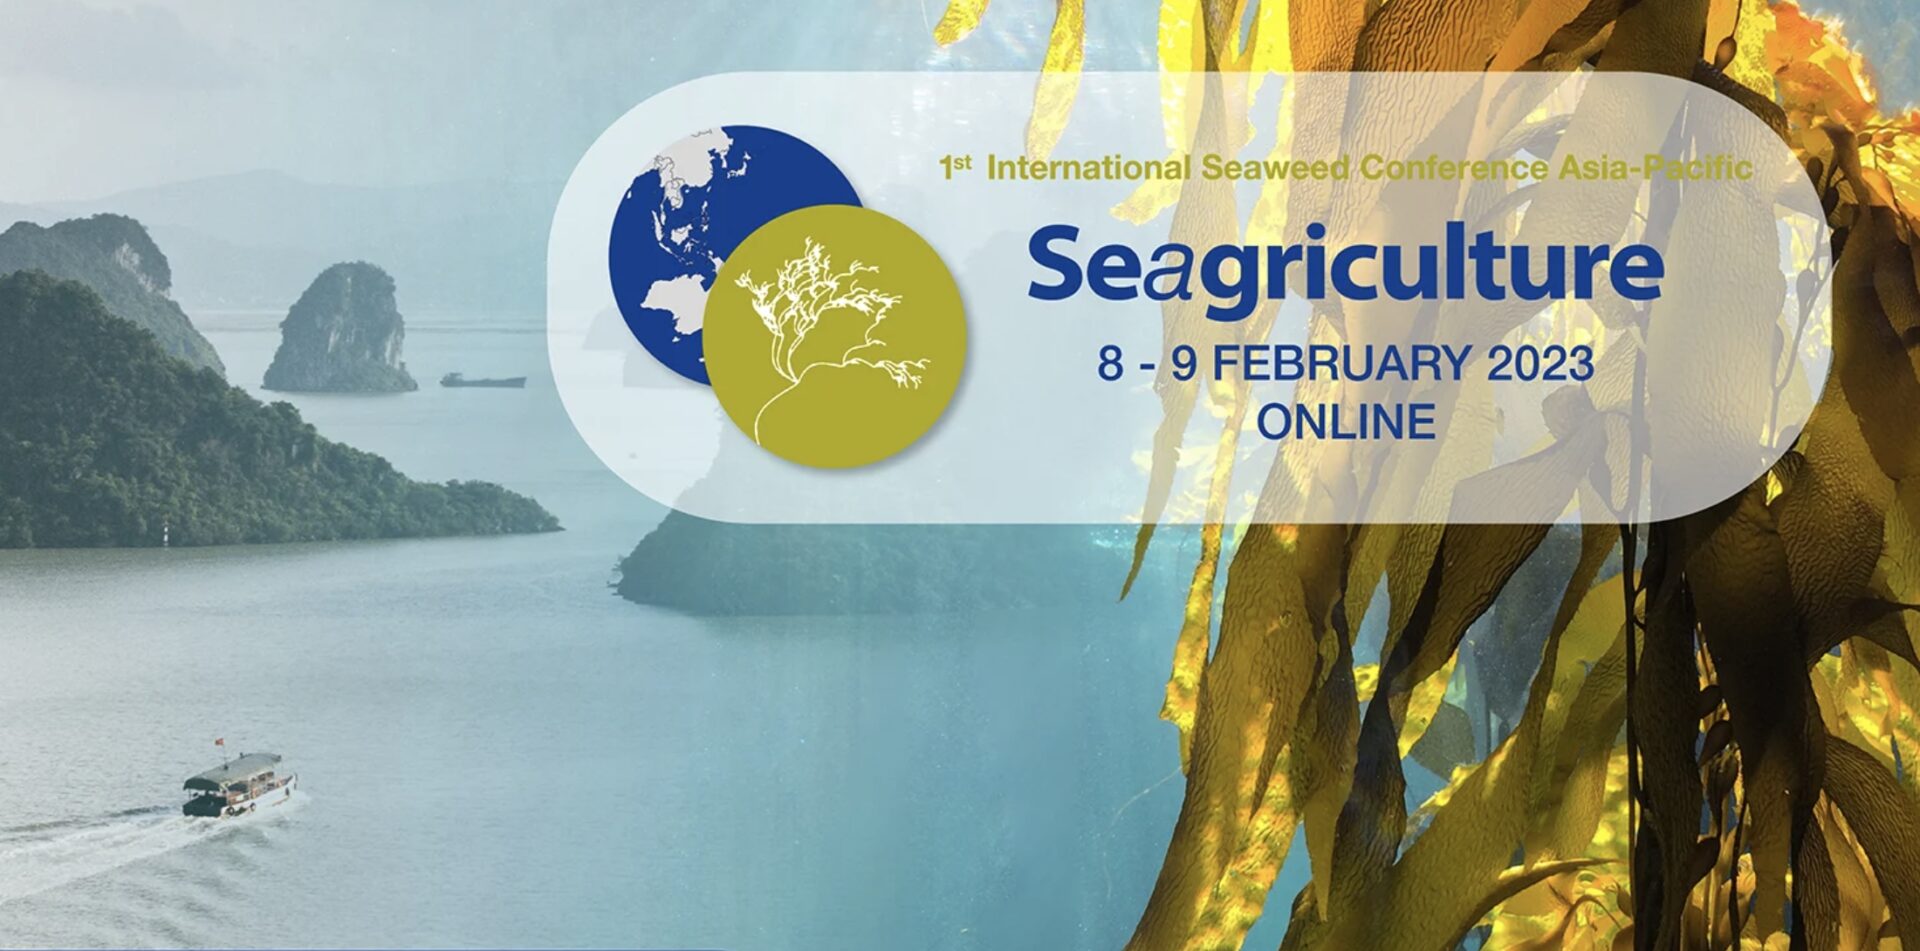 Seagriculture Asia-Pacific 2023